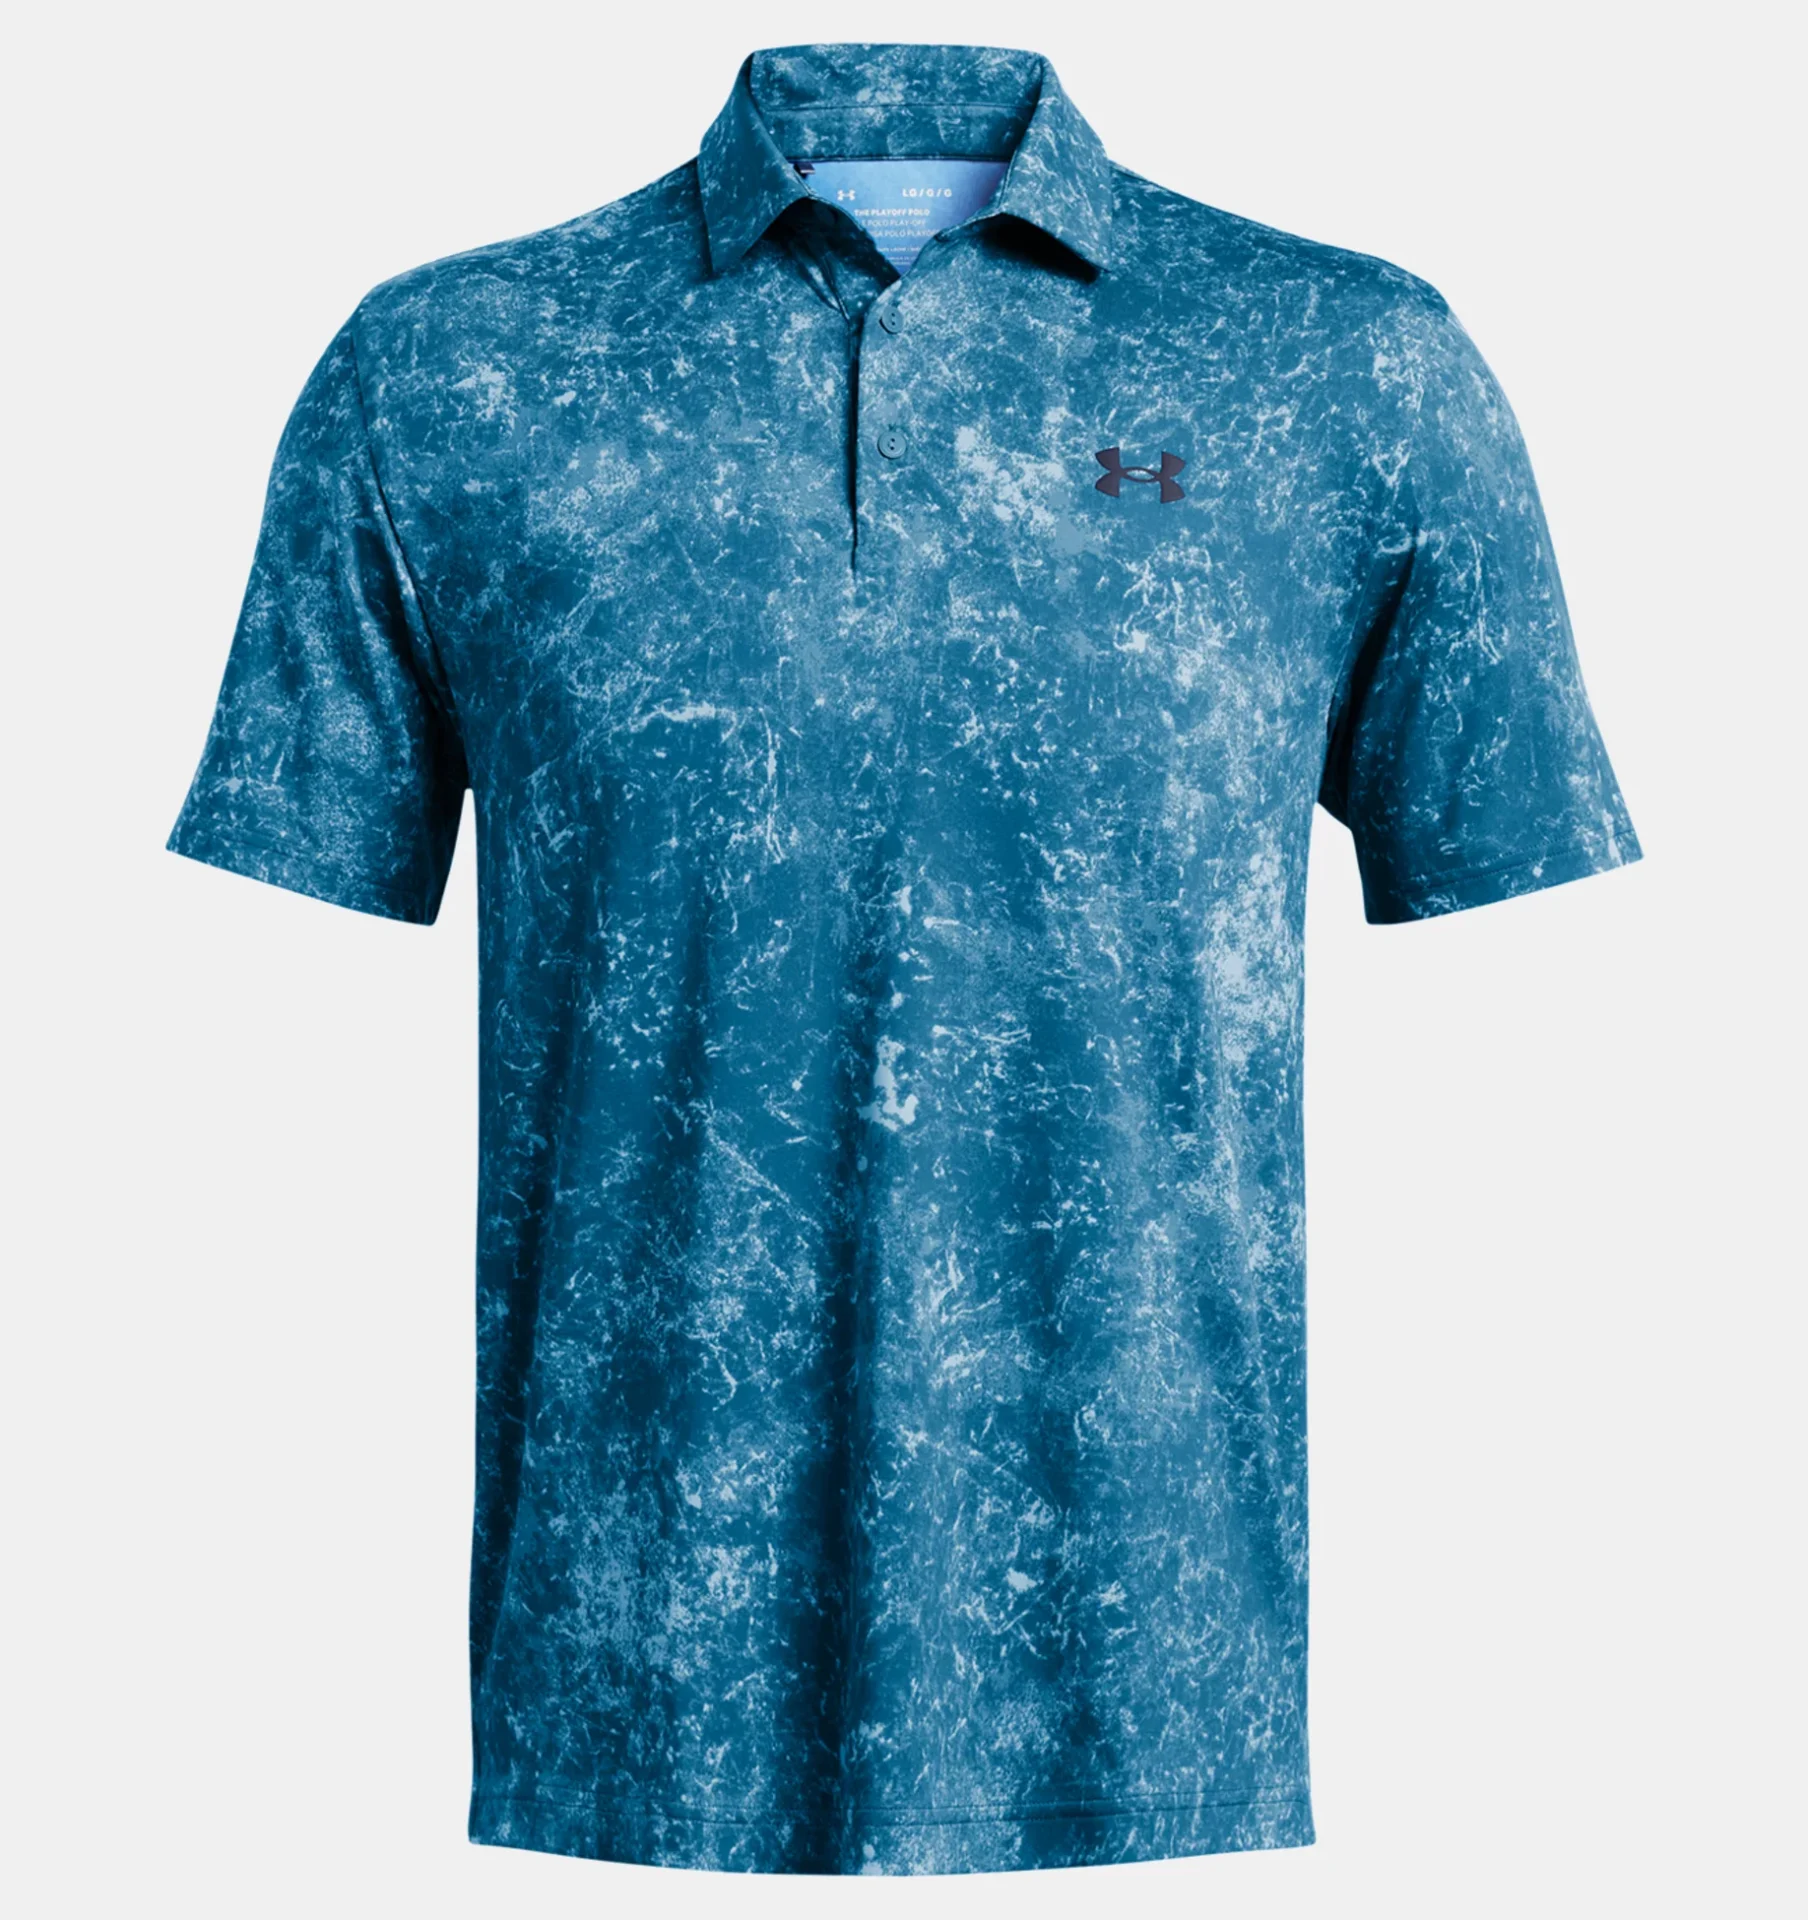 Under Armor men's Playoff 3.0 Printed Polo in Photon Blue